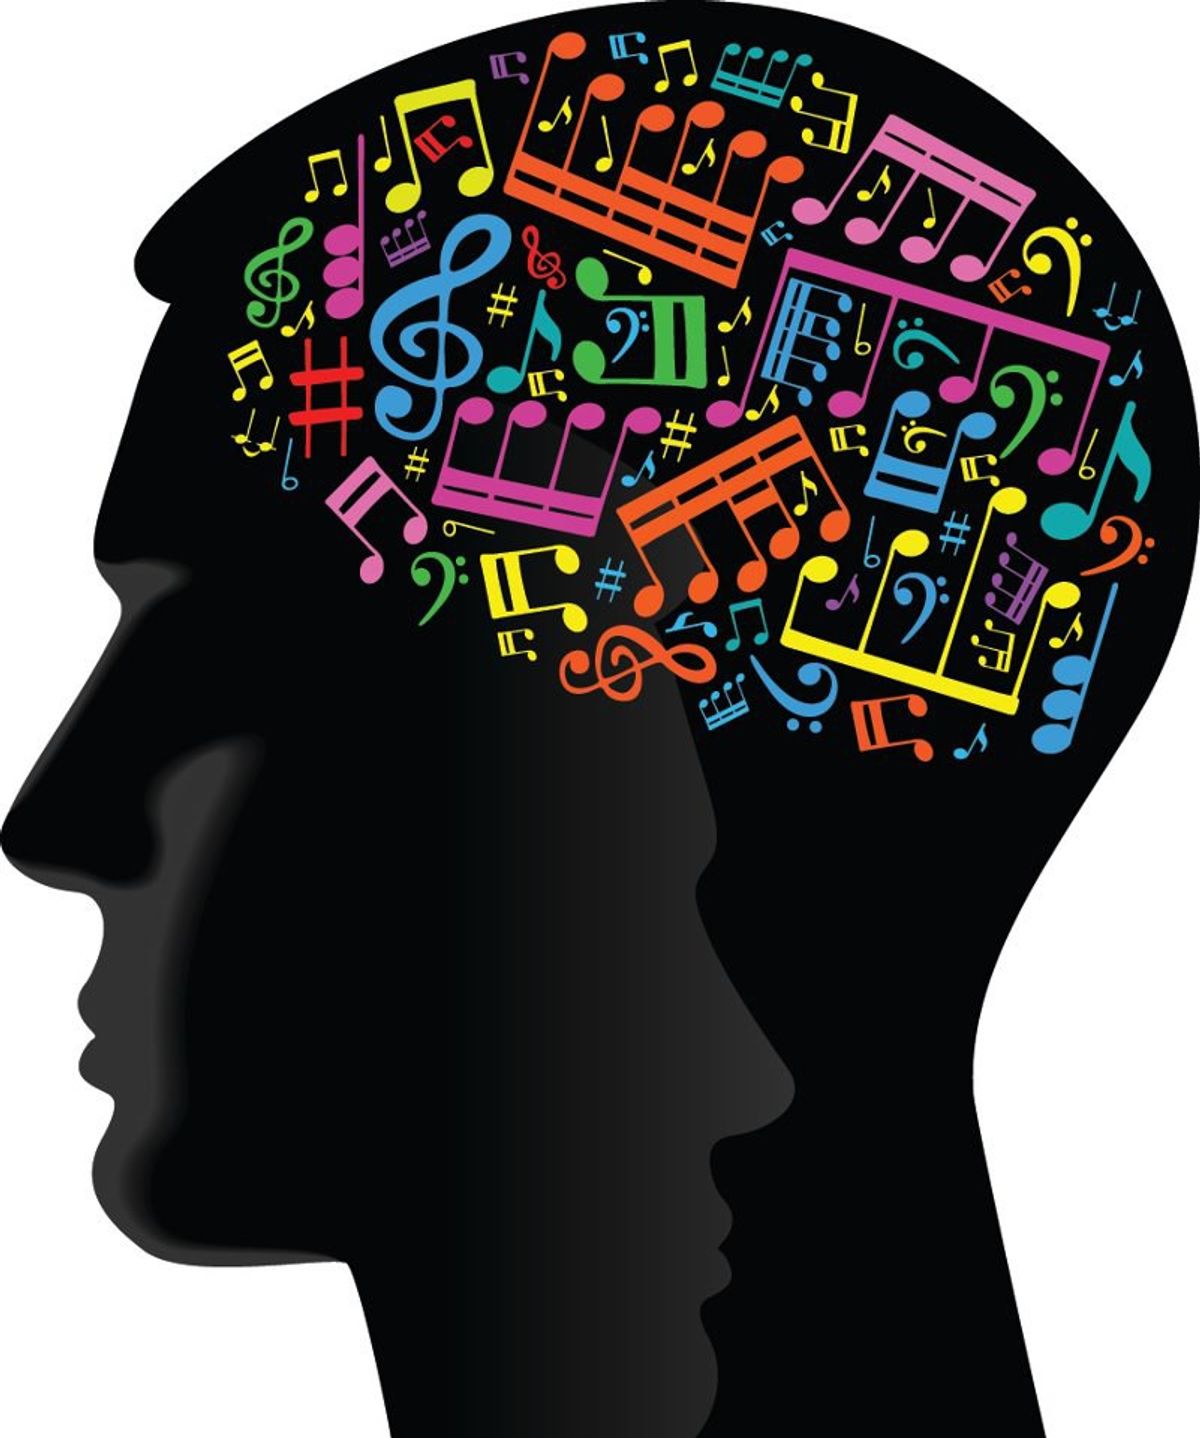 Music And The Brain: How Does Music Affect The Brain?